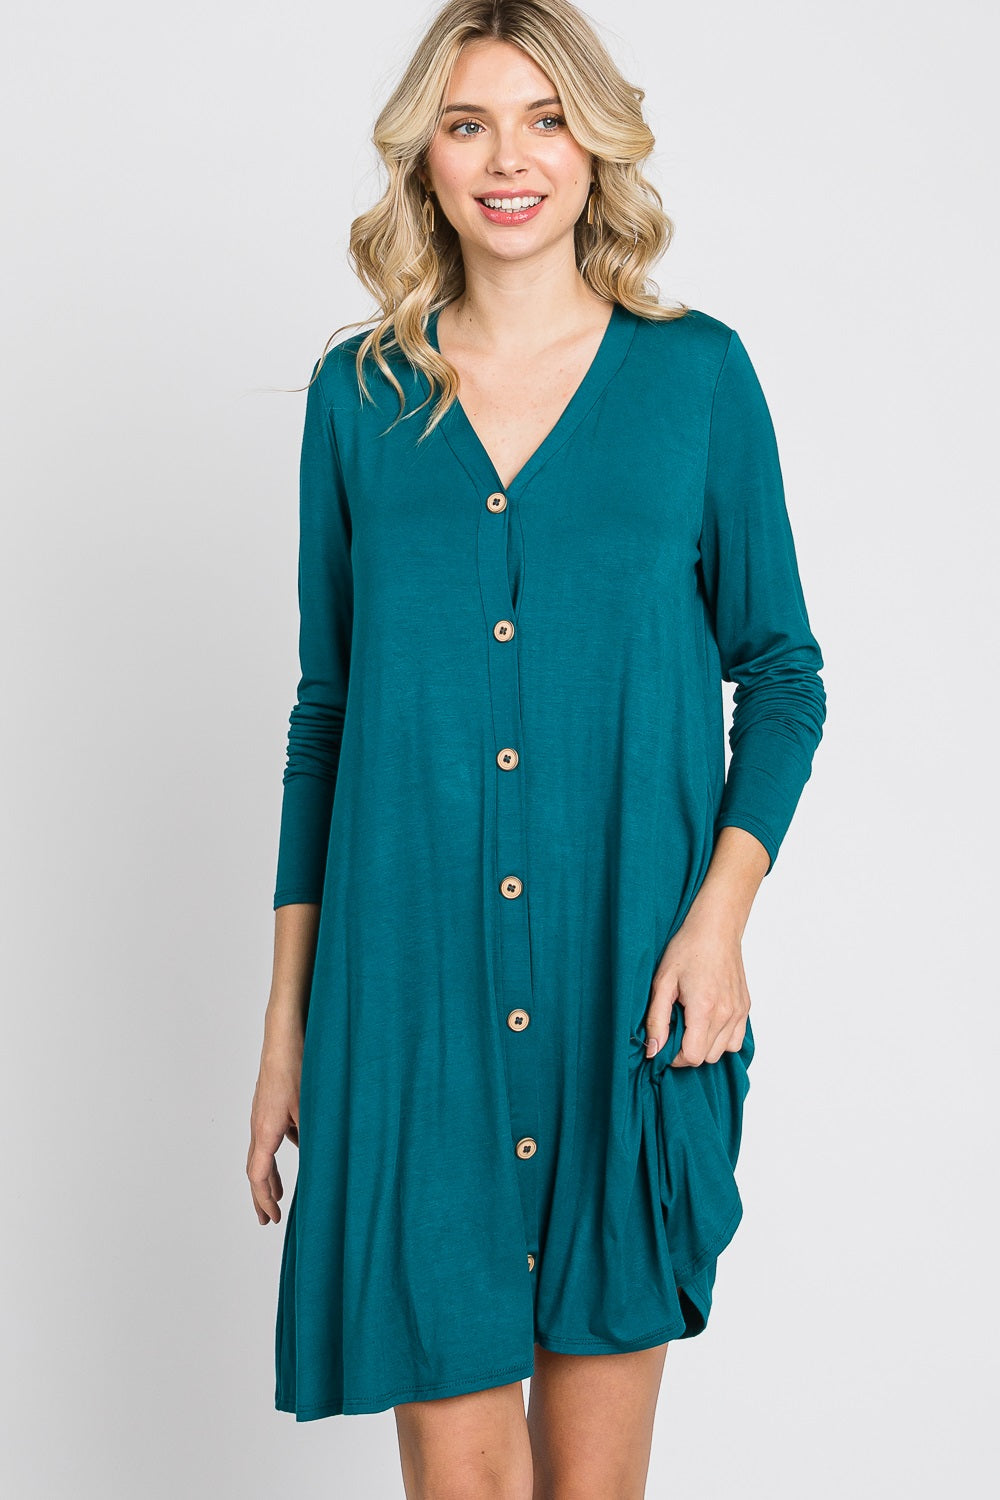 Long Sleeve v neck button down casual teal dress